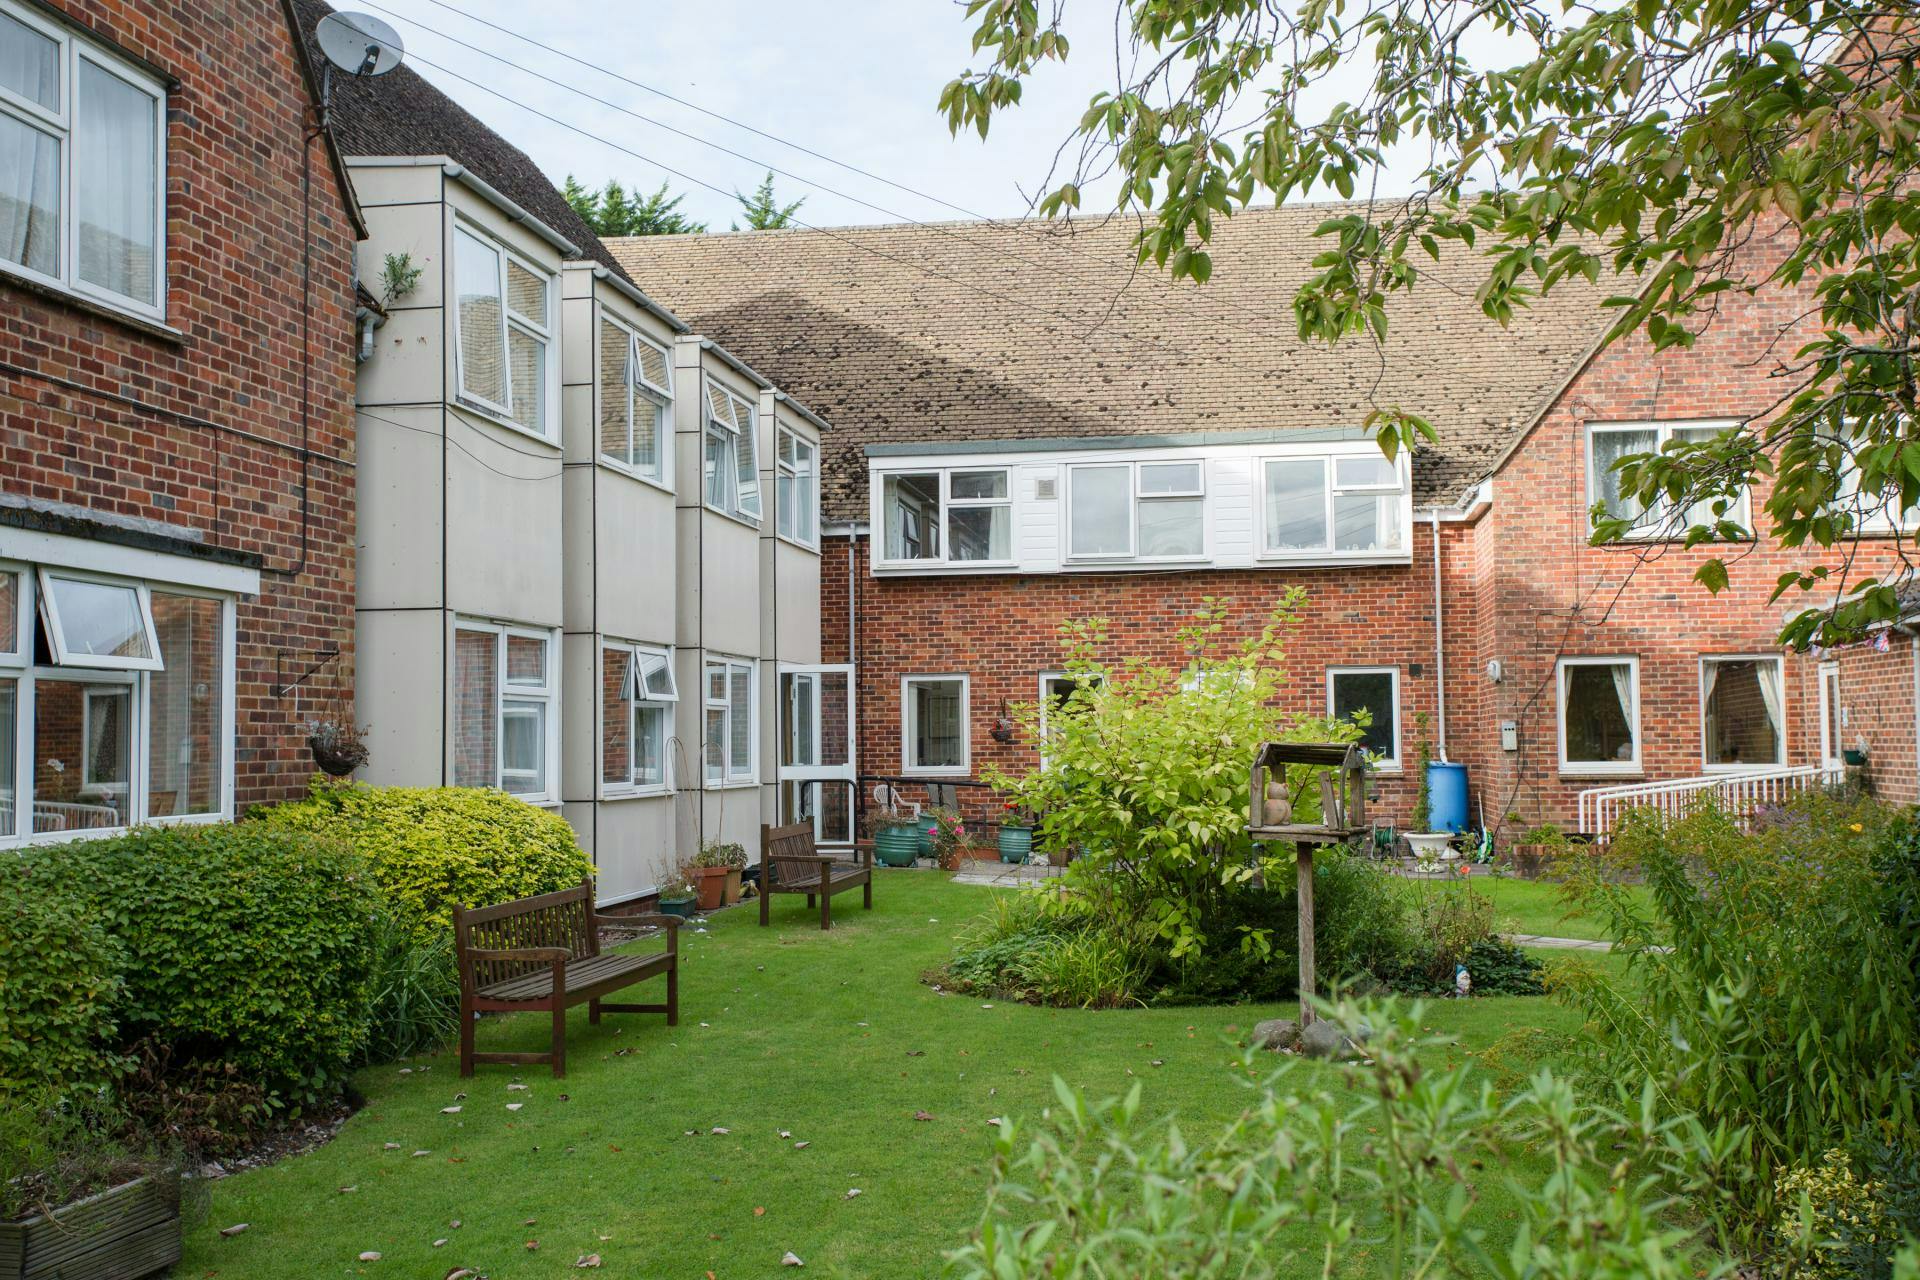 Garden at Willowcroft Care Home in Salisbury, Wiltshire